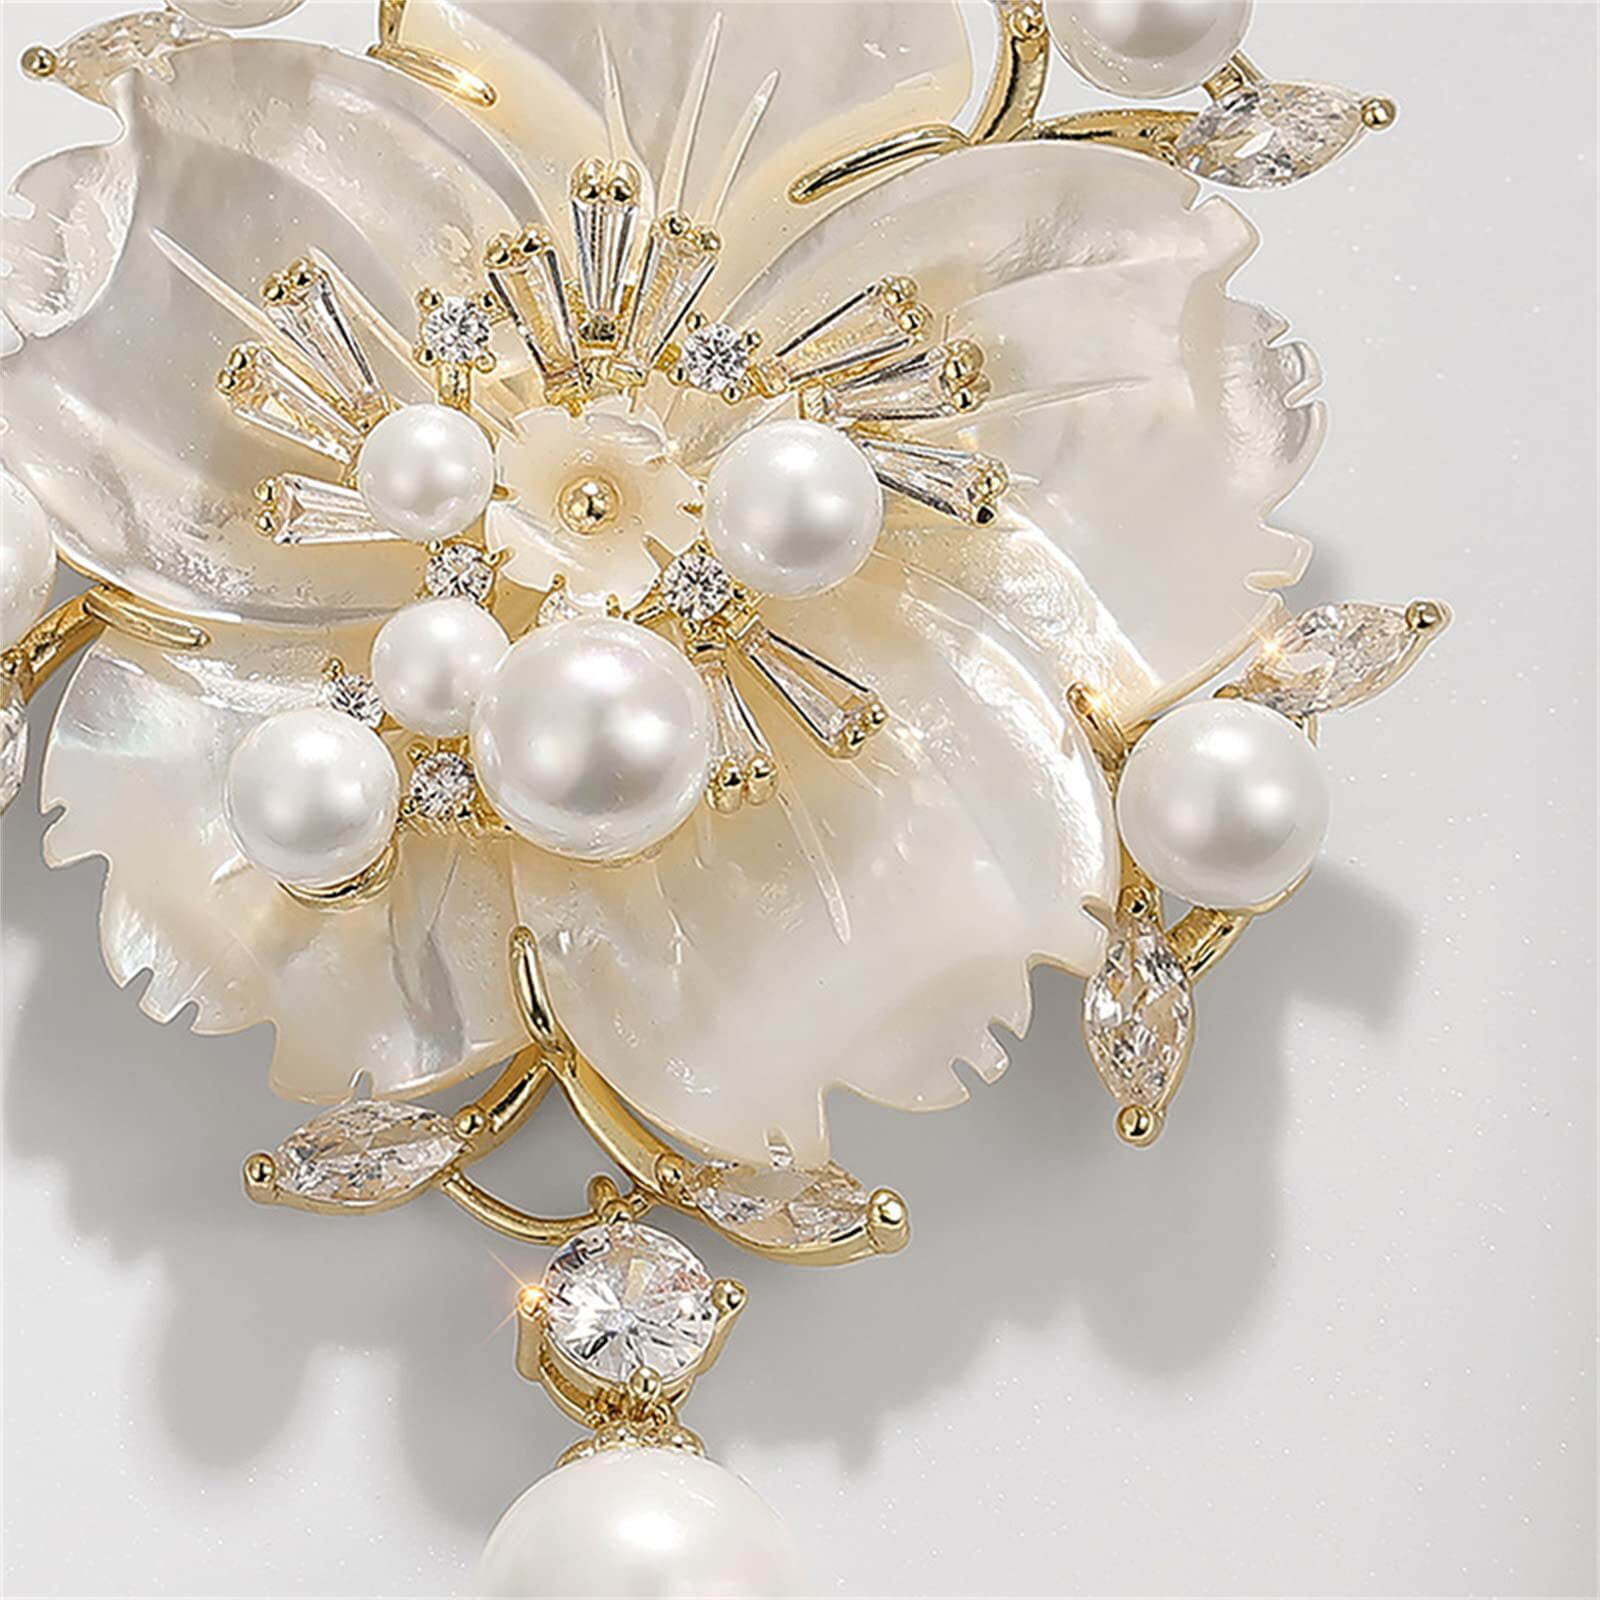 Yalych Women's Brooches Brooch Pins Vintage Pearl Corsage Jewelry Crystal  Geometry Flower Brooch Pins with Simulated Pearl Bouquet Jewelry  Accessories